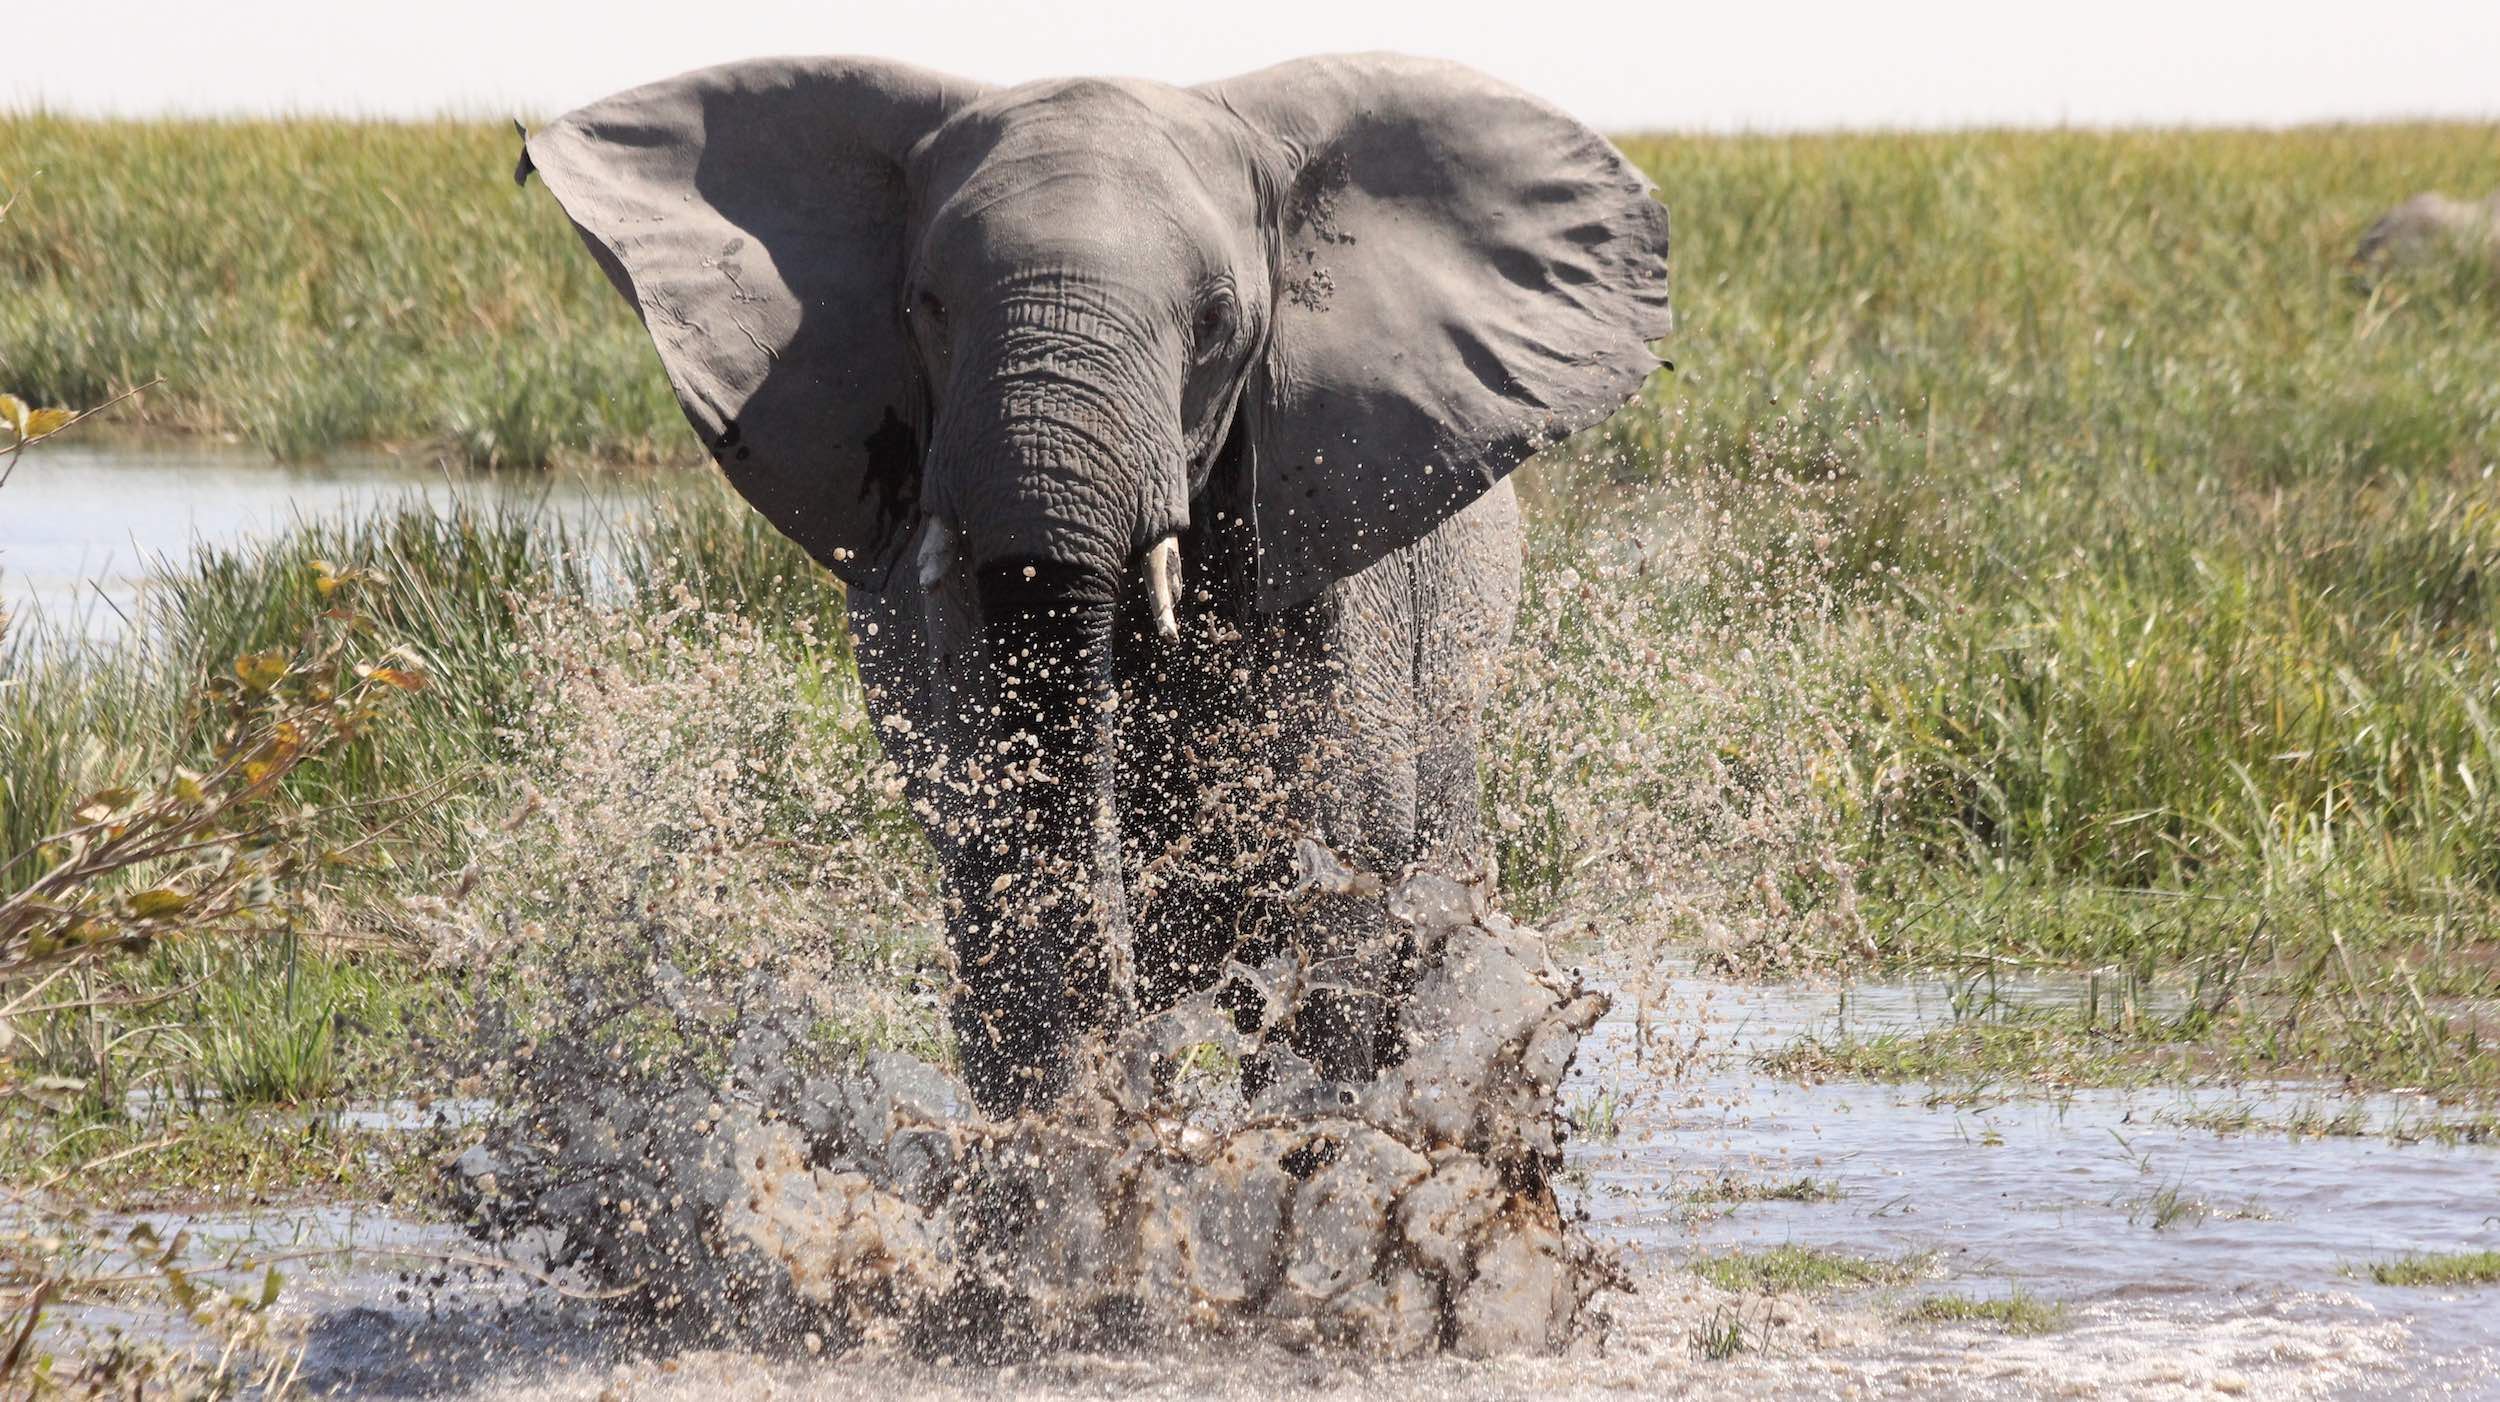 An elephant charges through a river towards the camera.